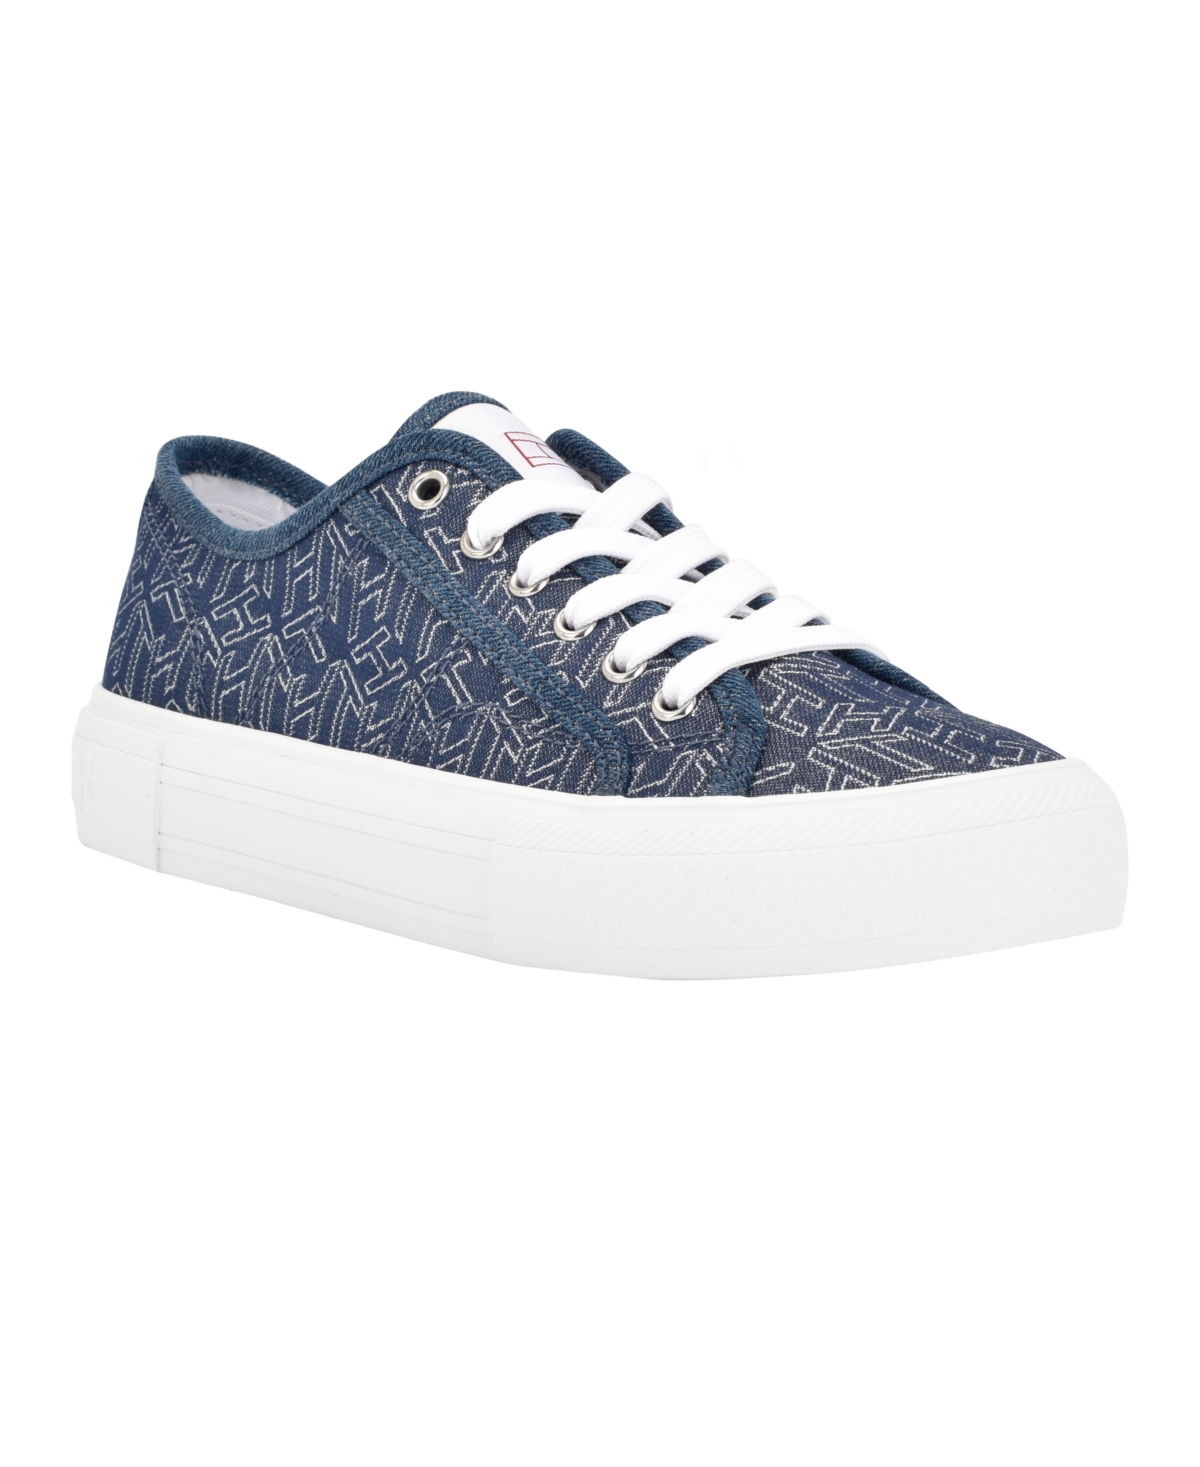 UPC 197016282947 product image for Tommy Hilfiger Women's Alessy Casual Lace Up Sneakers Women's Shoes | upcitemdb.com